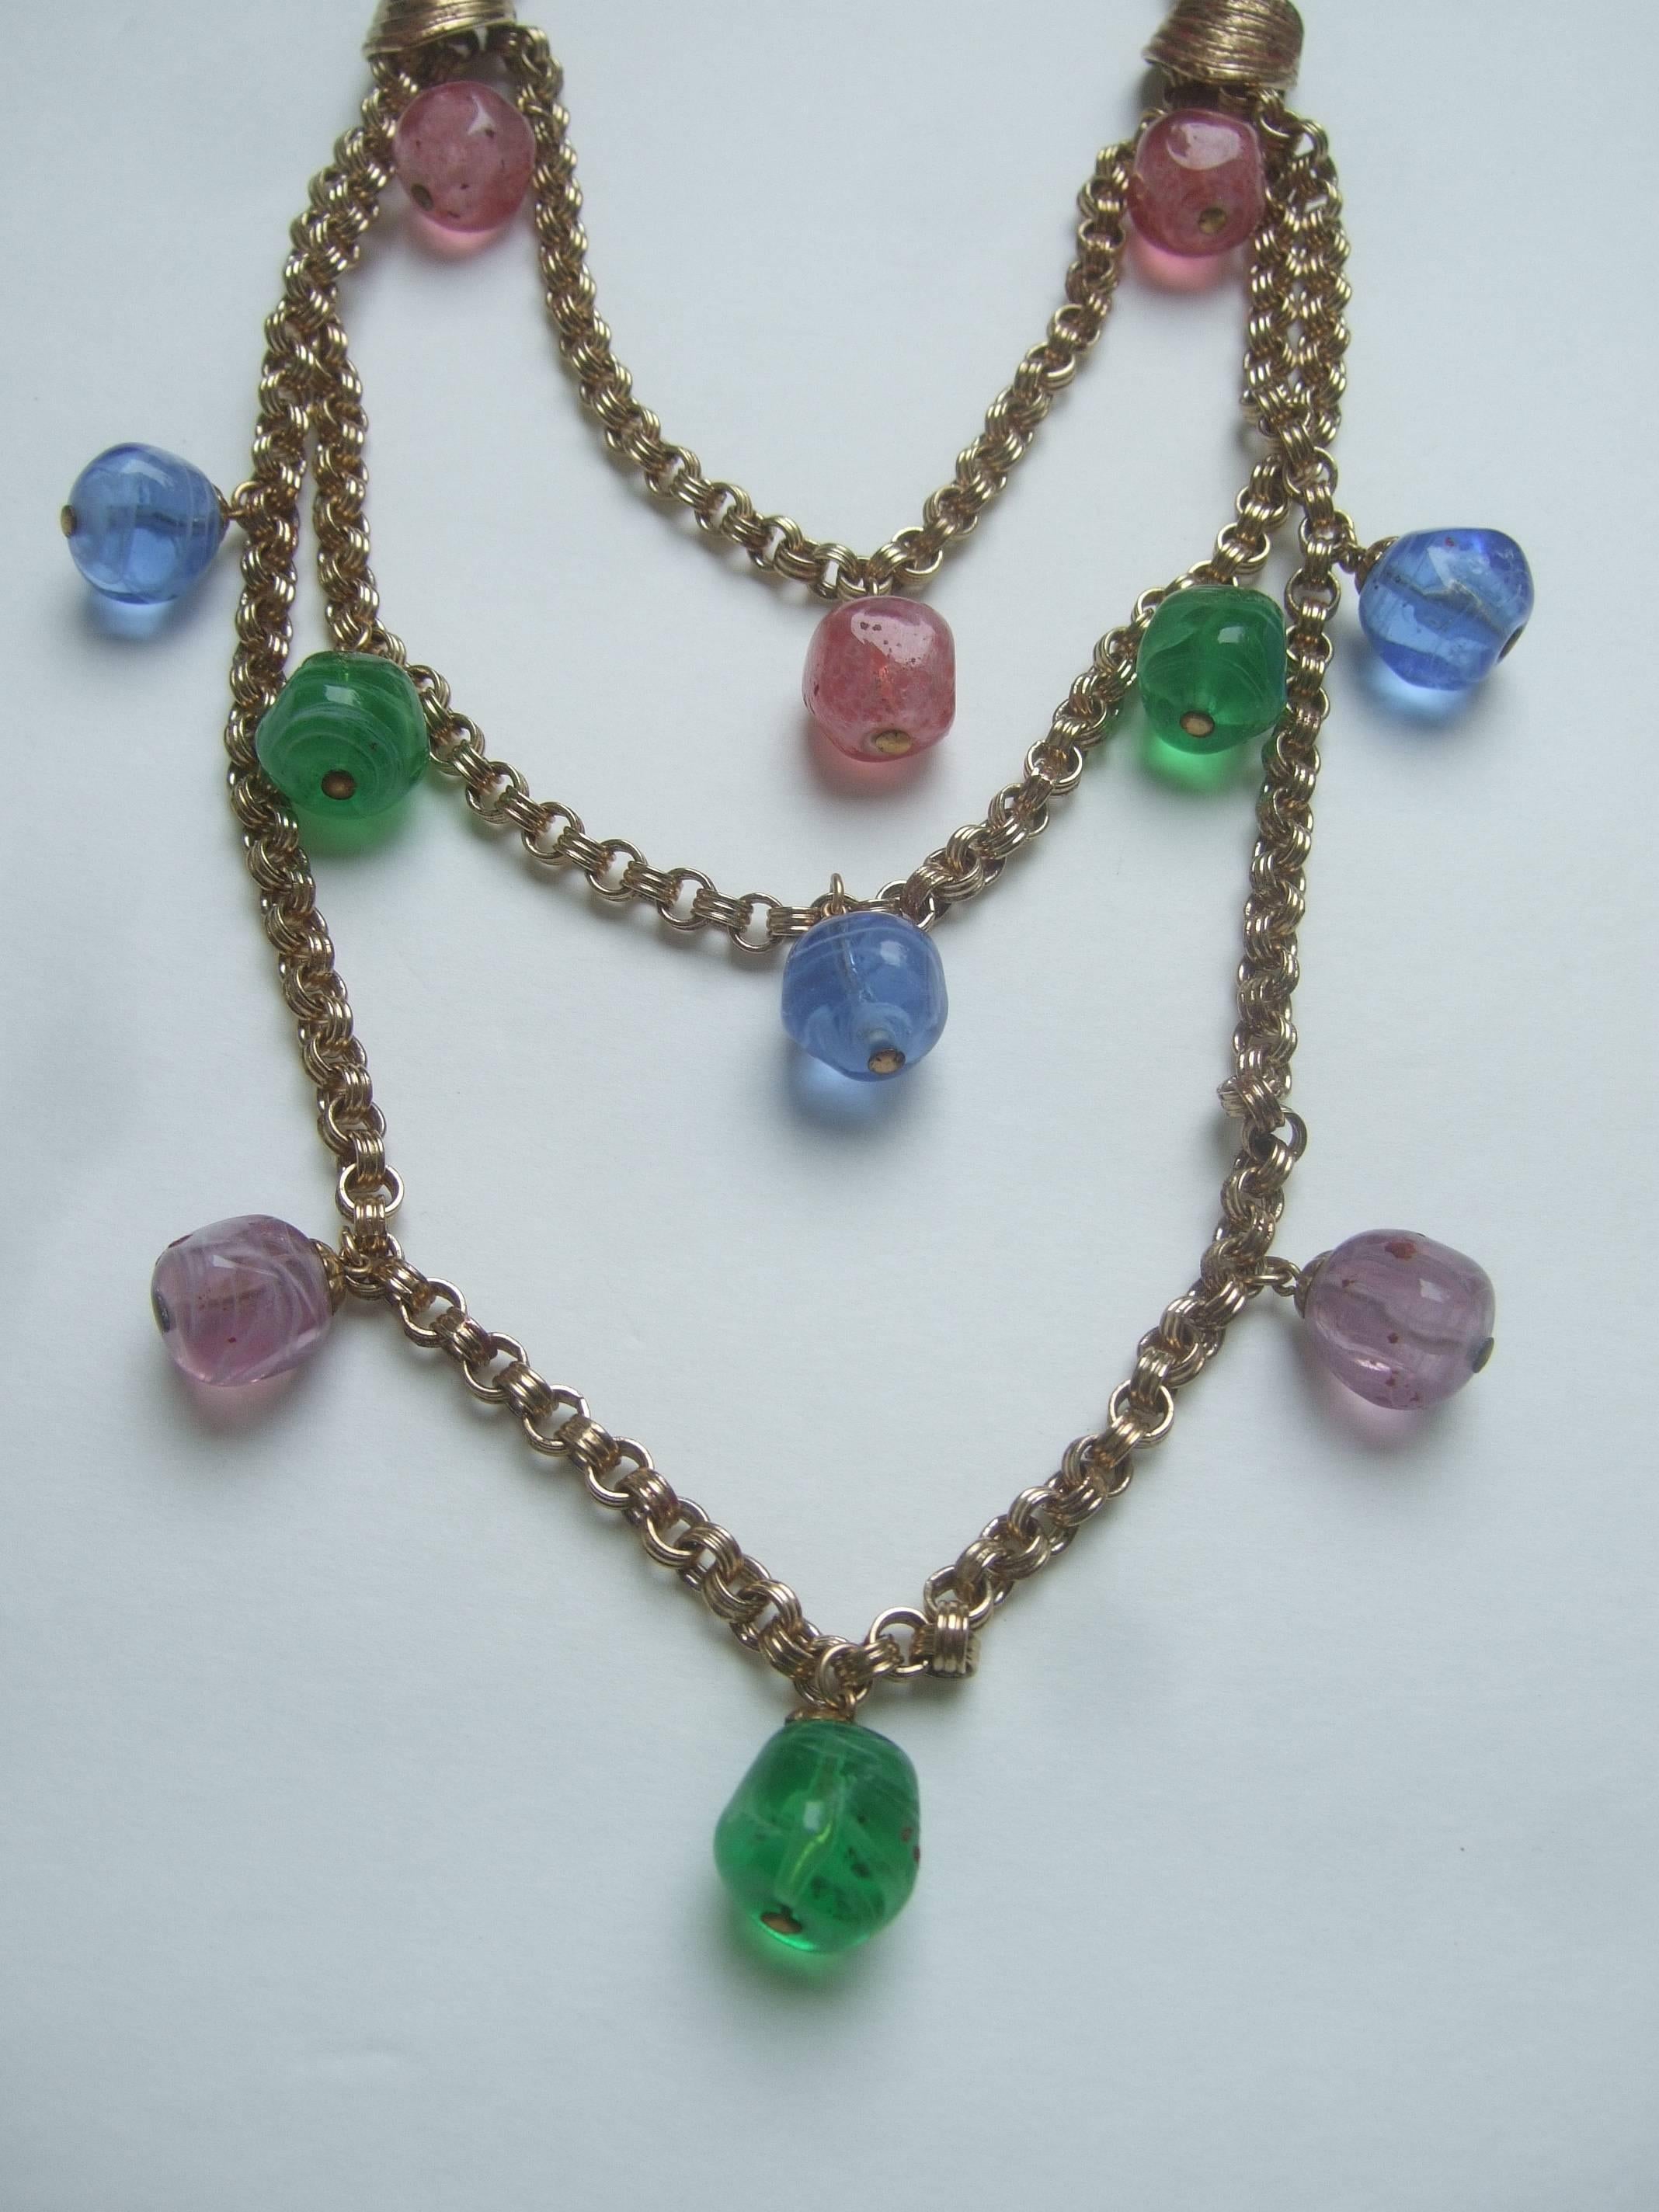 Bill Blass Glass Beaded Tiered Bib Necklace c 1970 In Good Condition For Sale In University City, MO